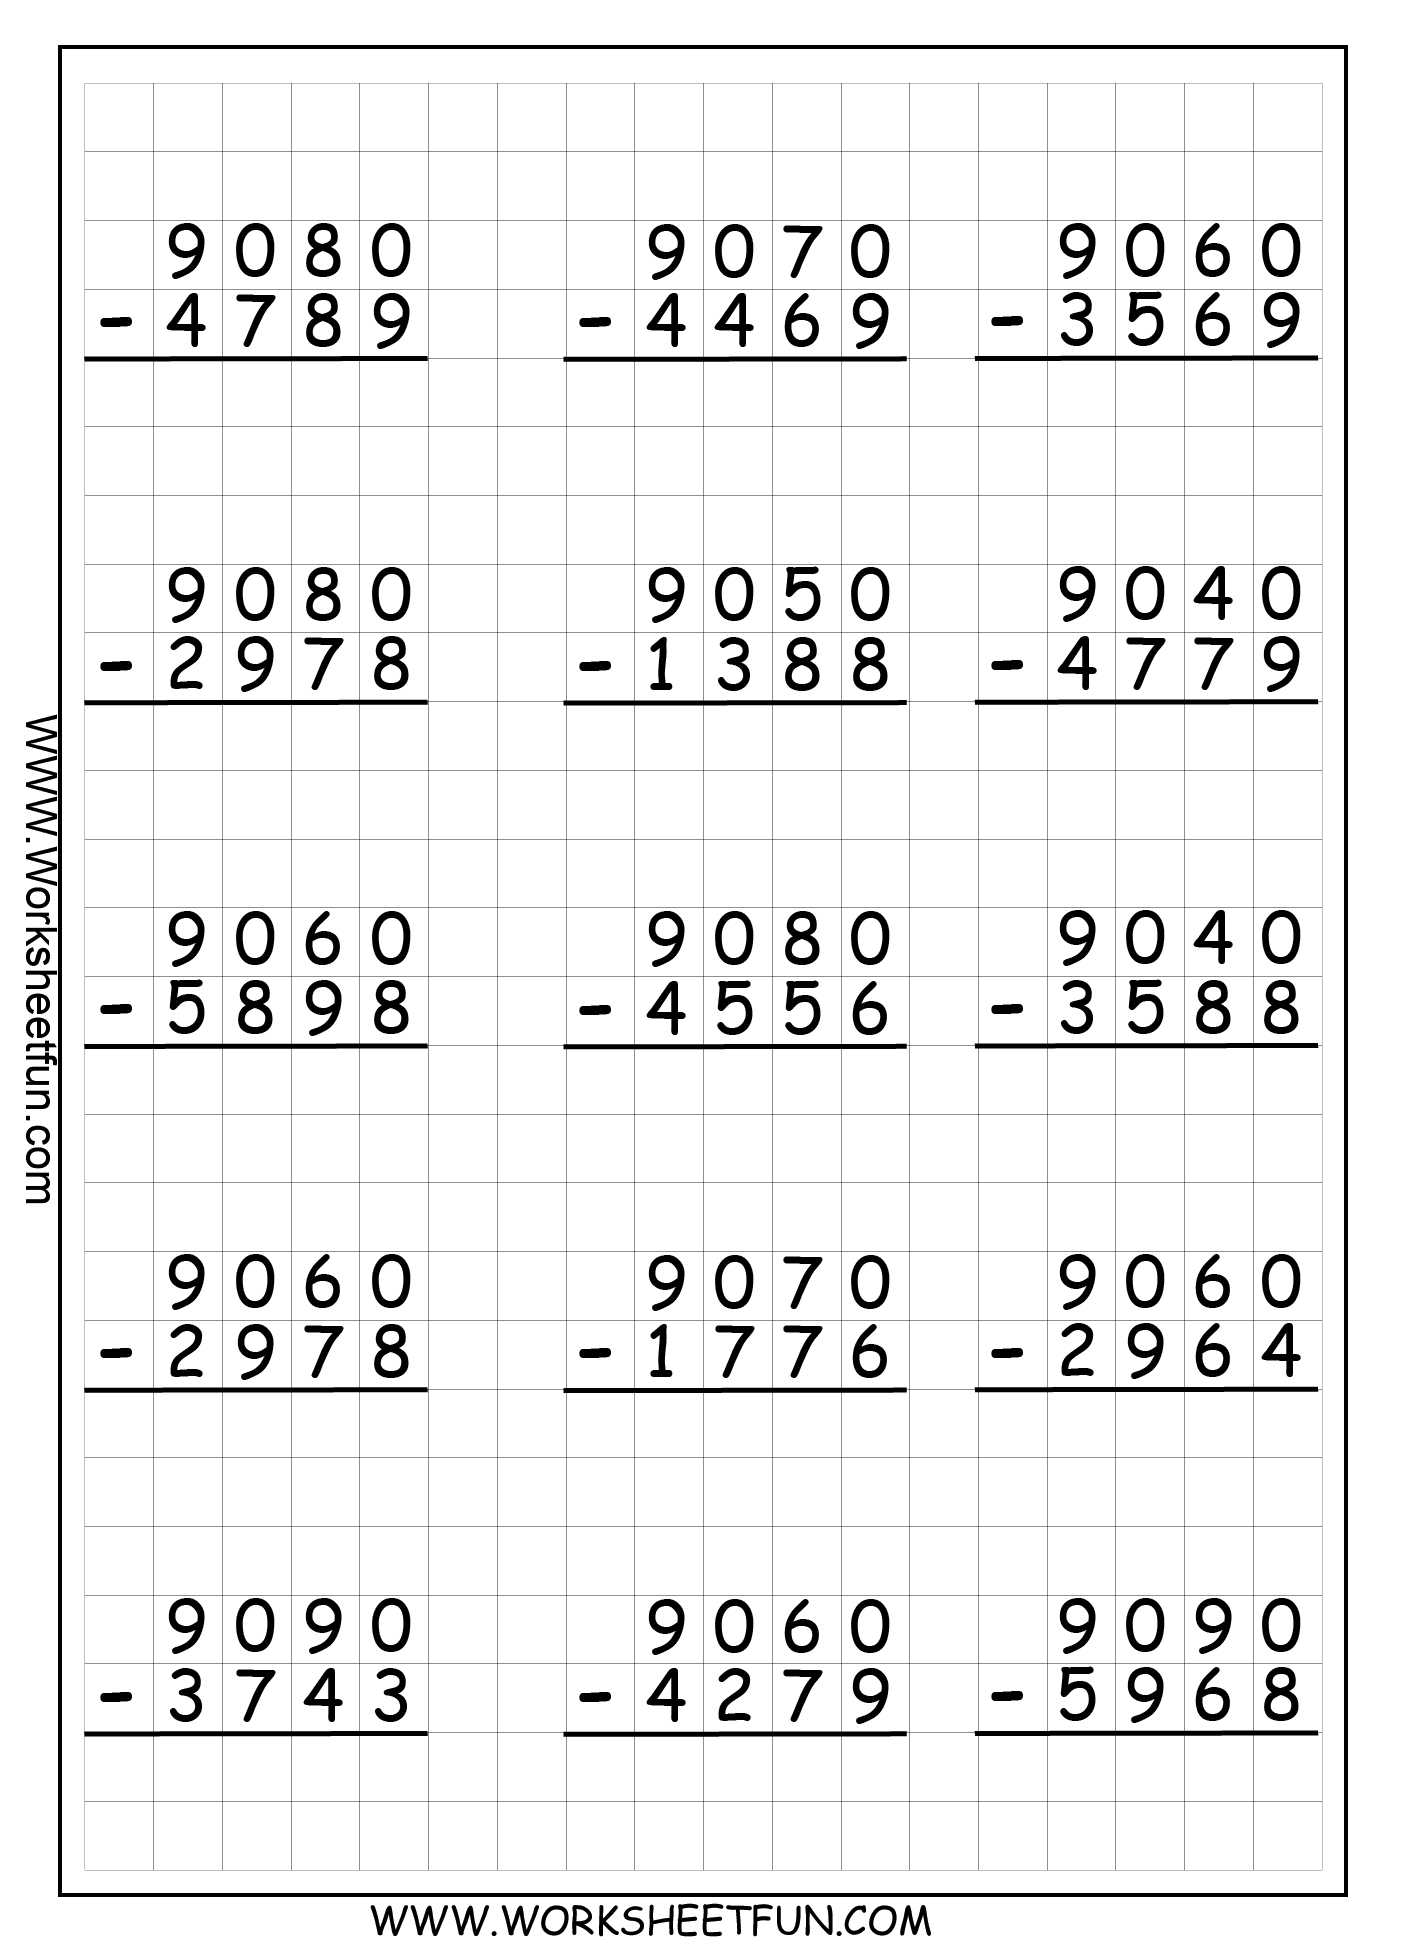 Addition Of Integers Worksheet together with Subtraction with Regrouping – 9 Worksheets